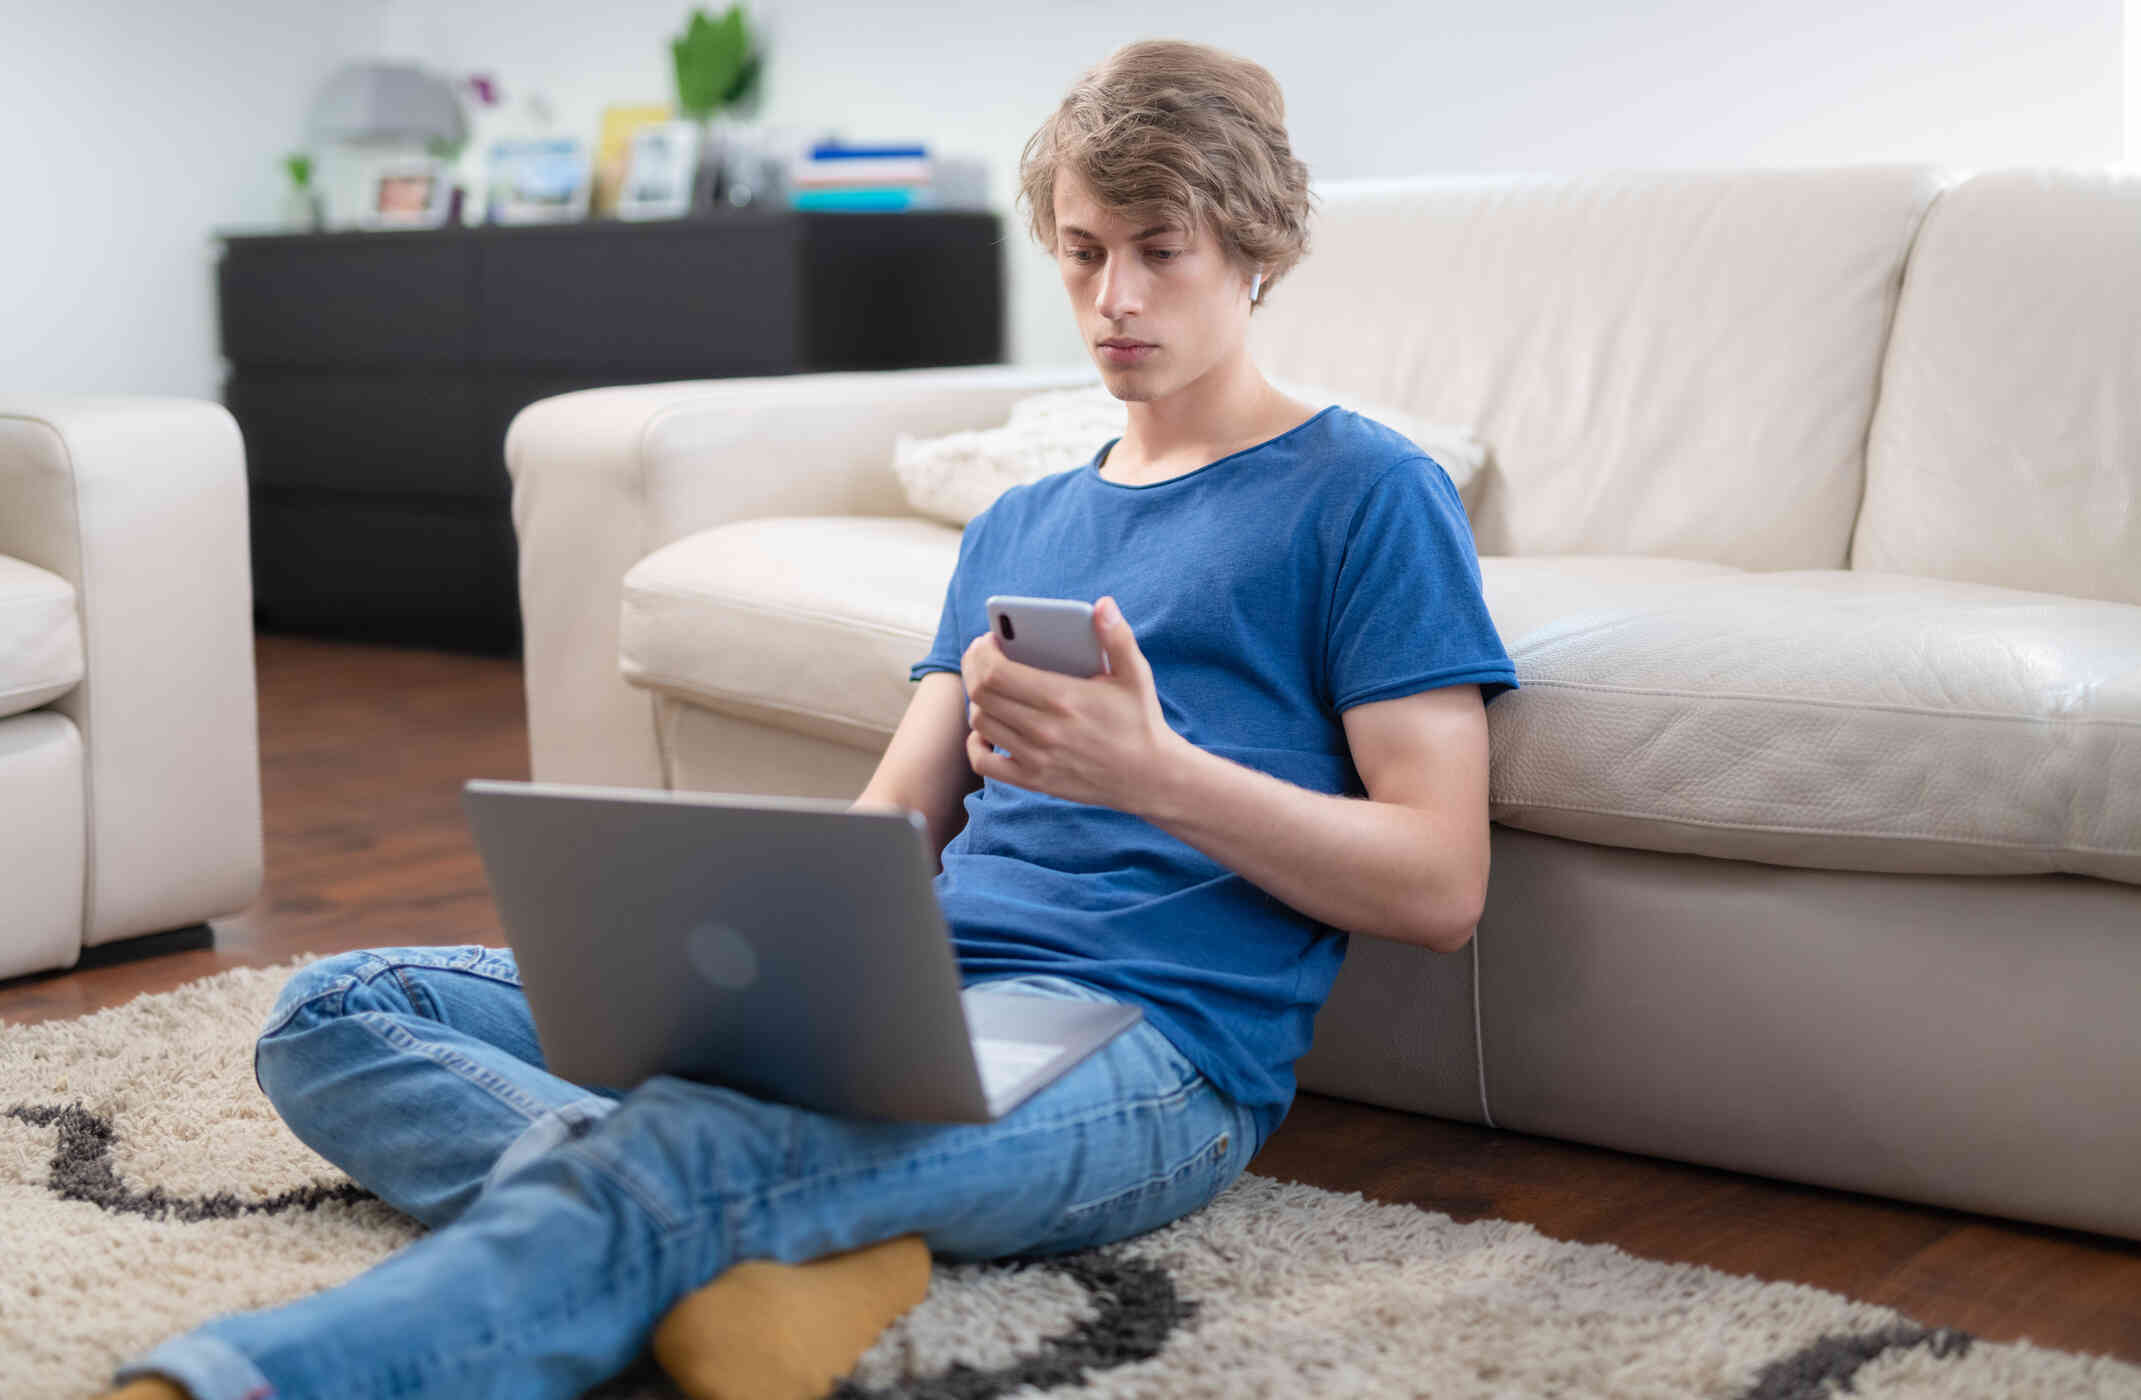 Ateen boy in a blie shirt sits on the florr with his back against the couch and his laptop open in his lap as he looks at the cellphone in his hand.